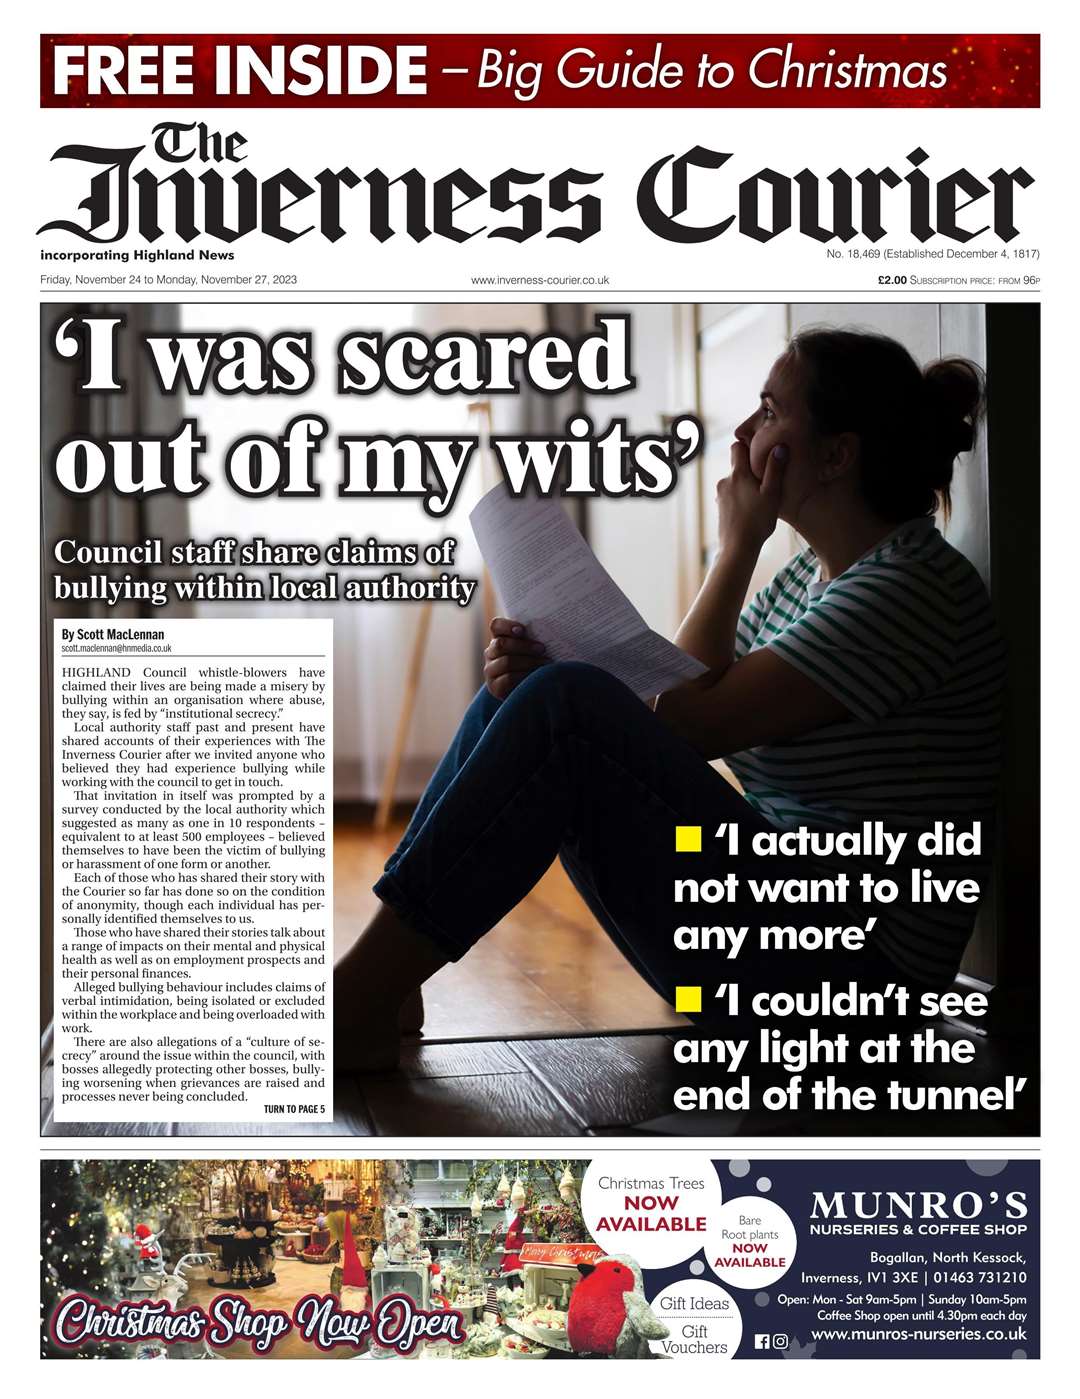 The Inverness Courier, November 24, front page.